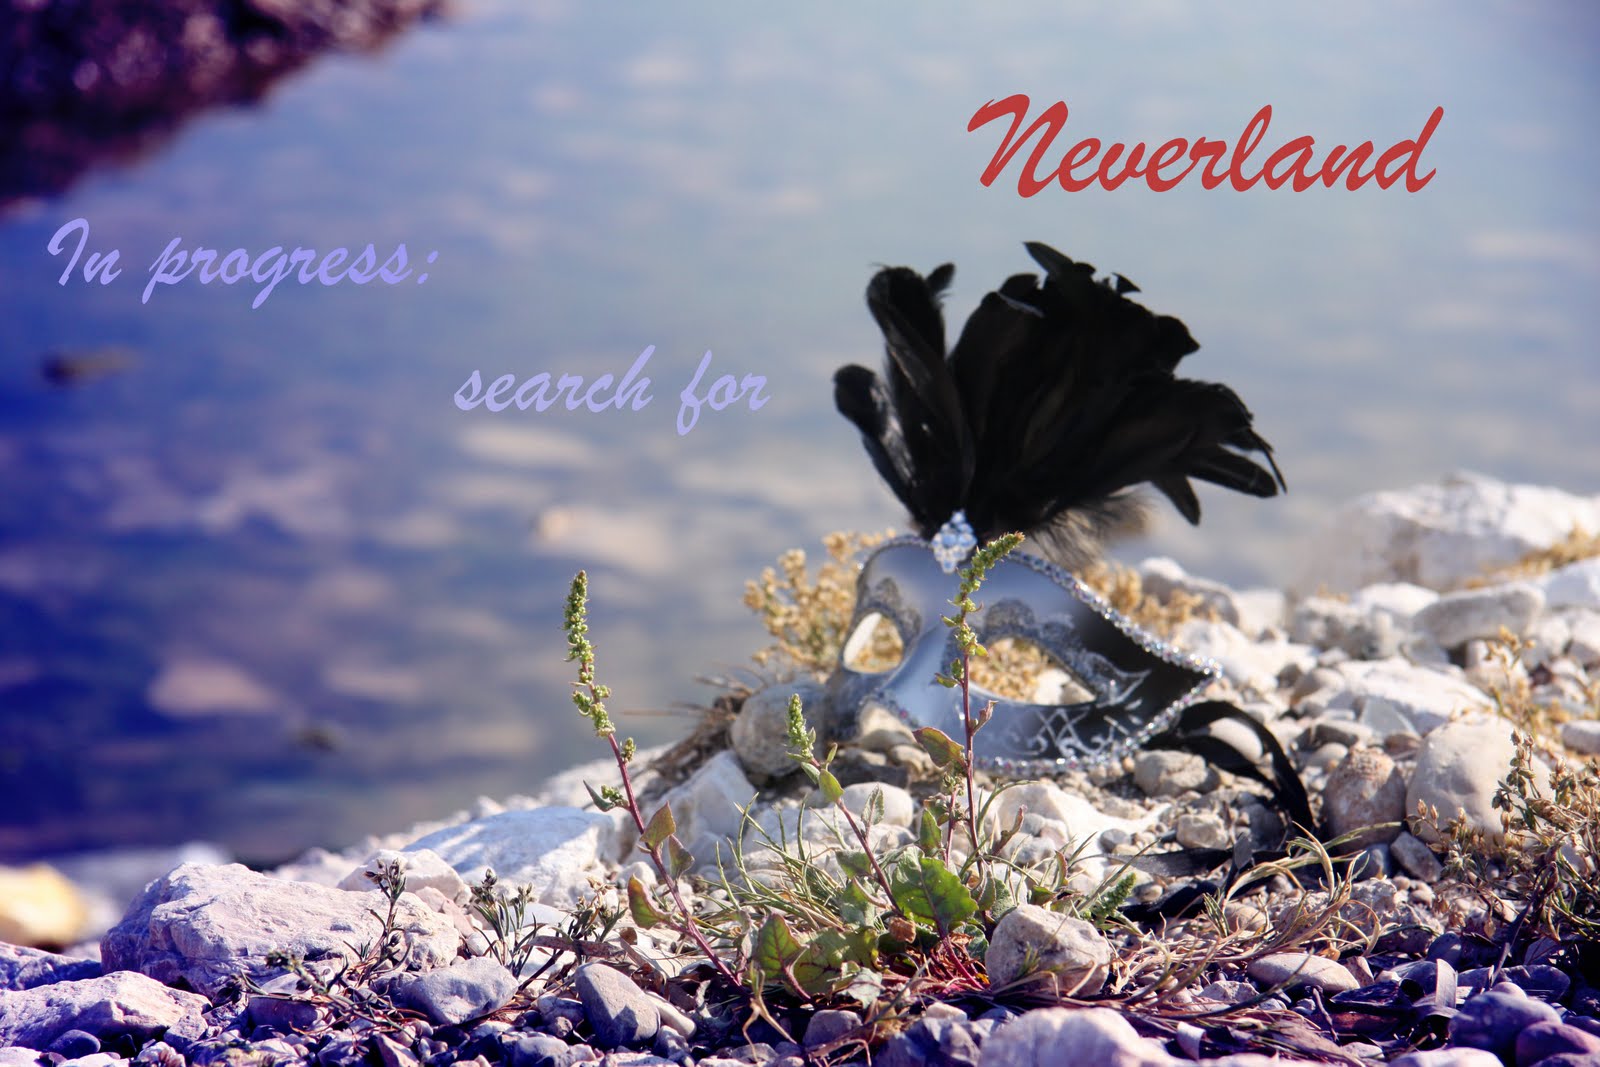 In progress: "search for Neverland"